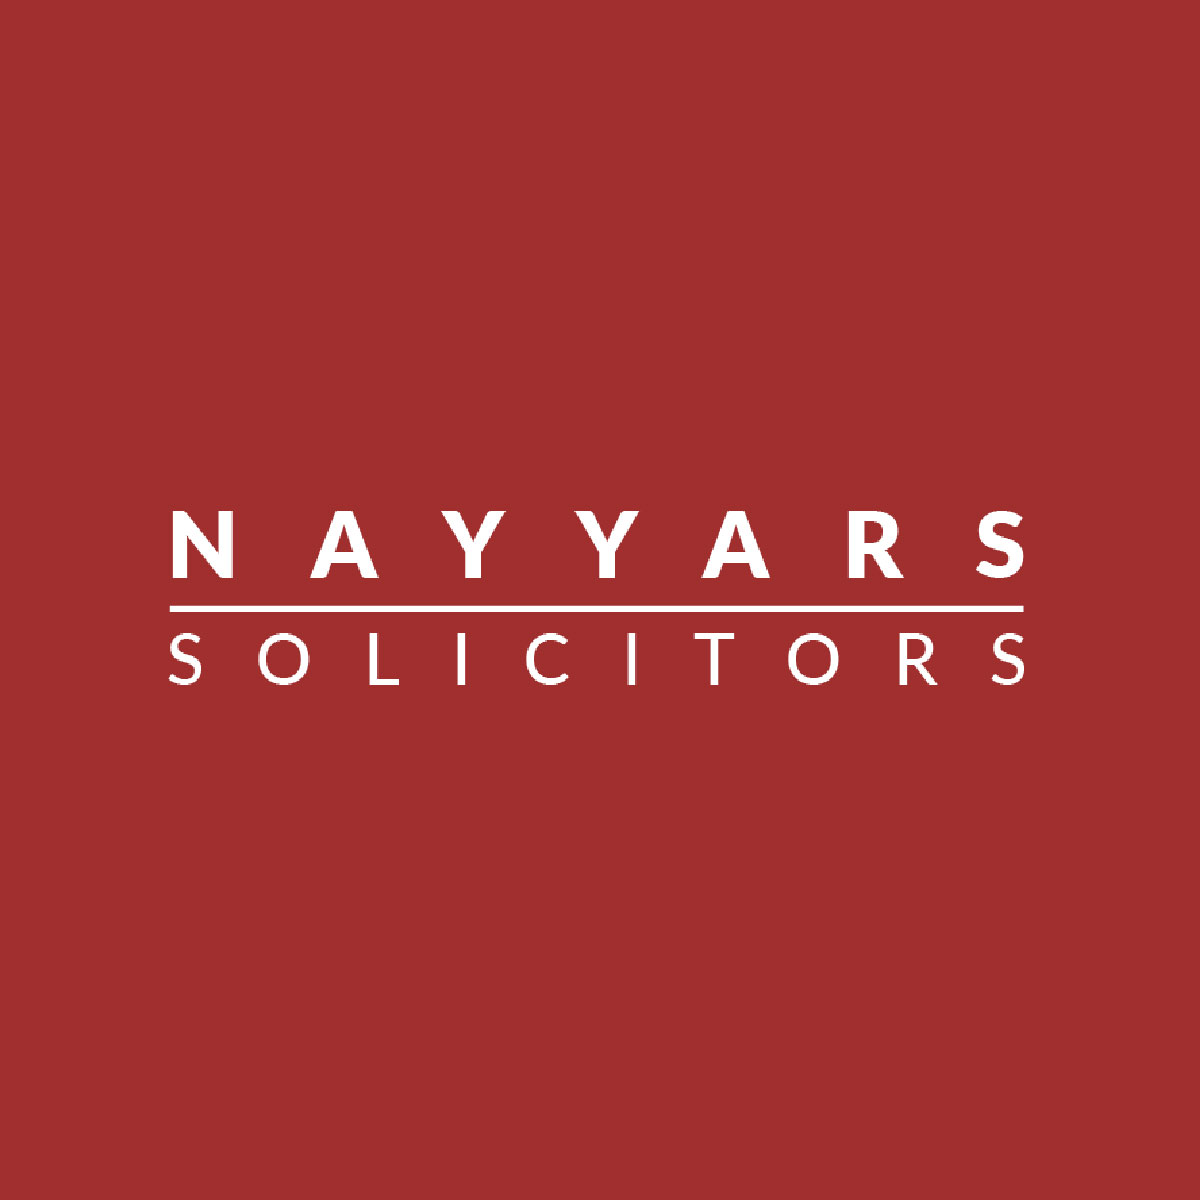 nayyars-solicitors-case-study-strawberry-forge